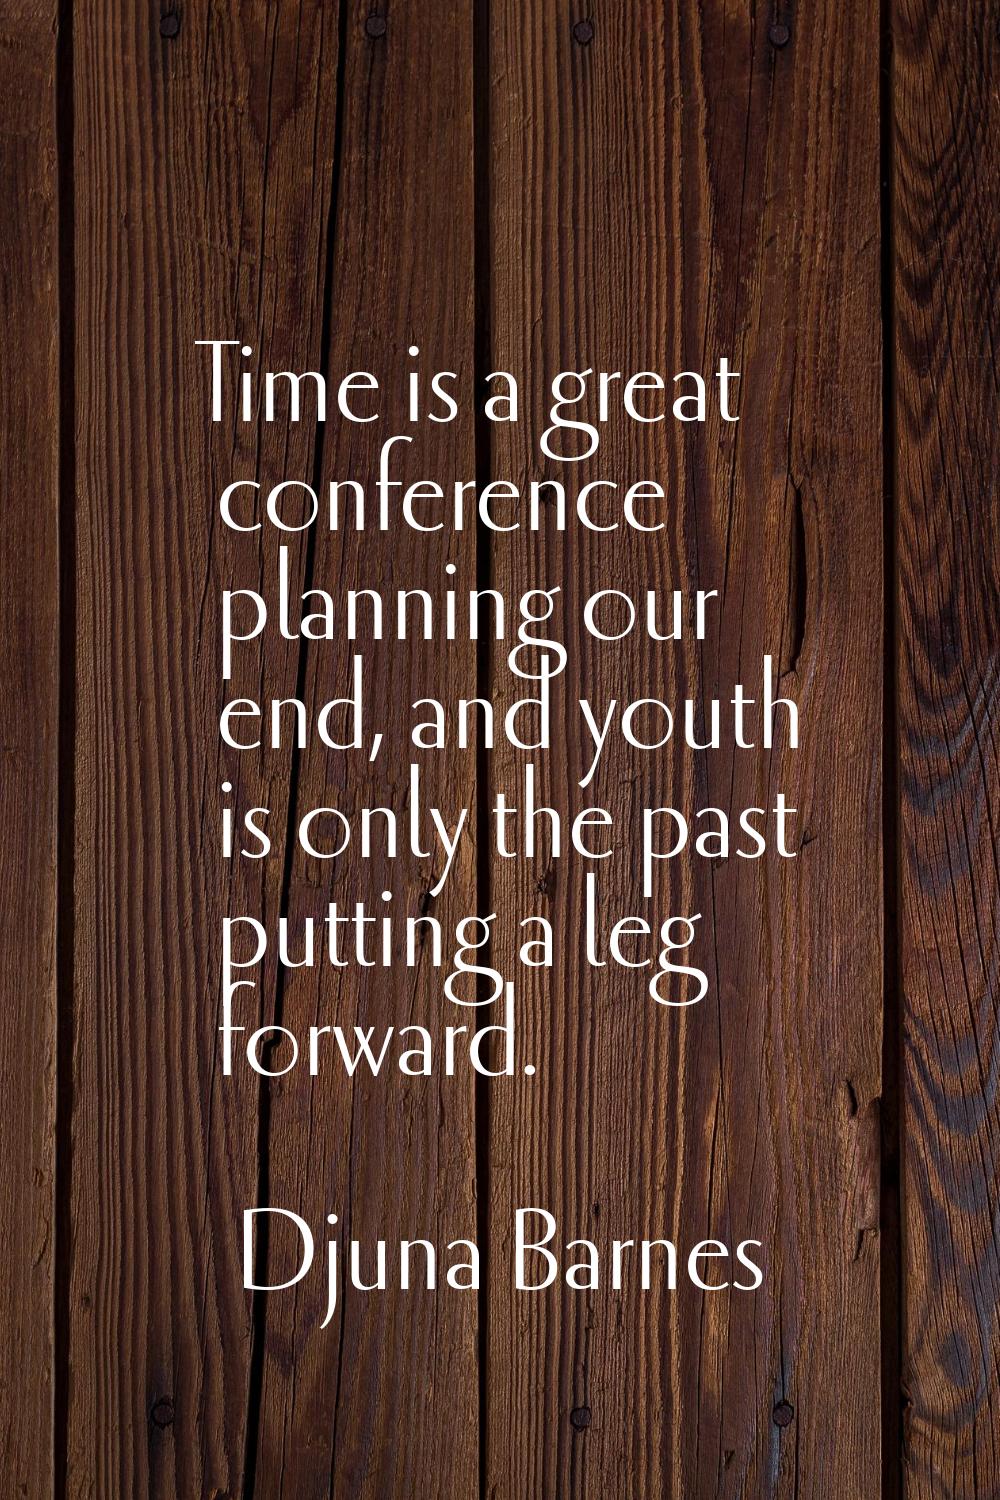 Time is a great conference planning our end, and youth is only the past putting a leg forward.